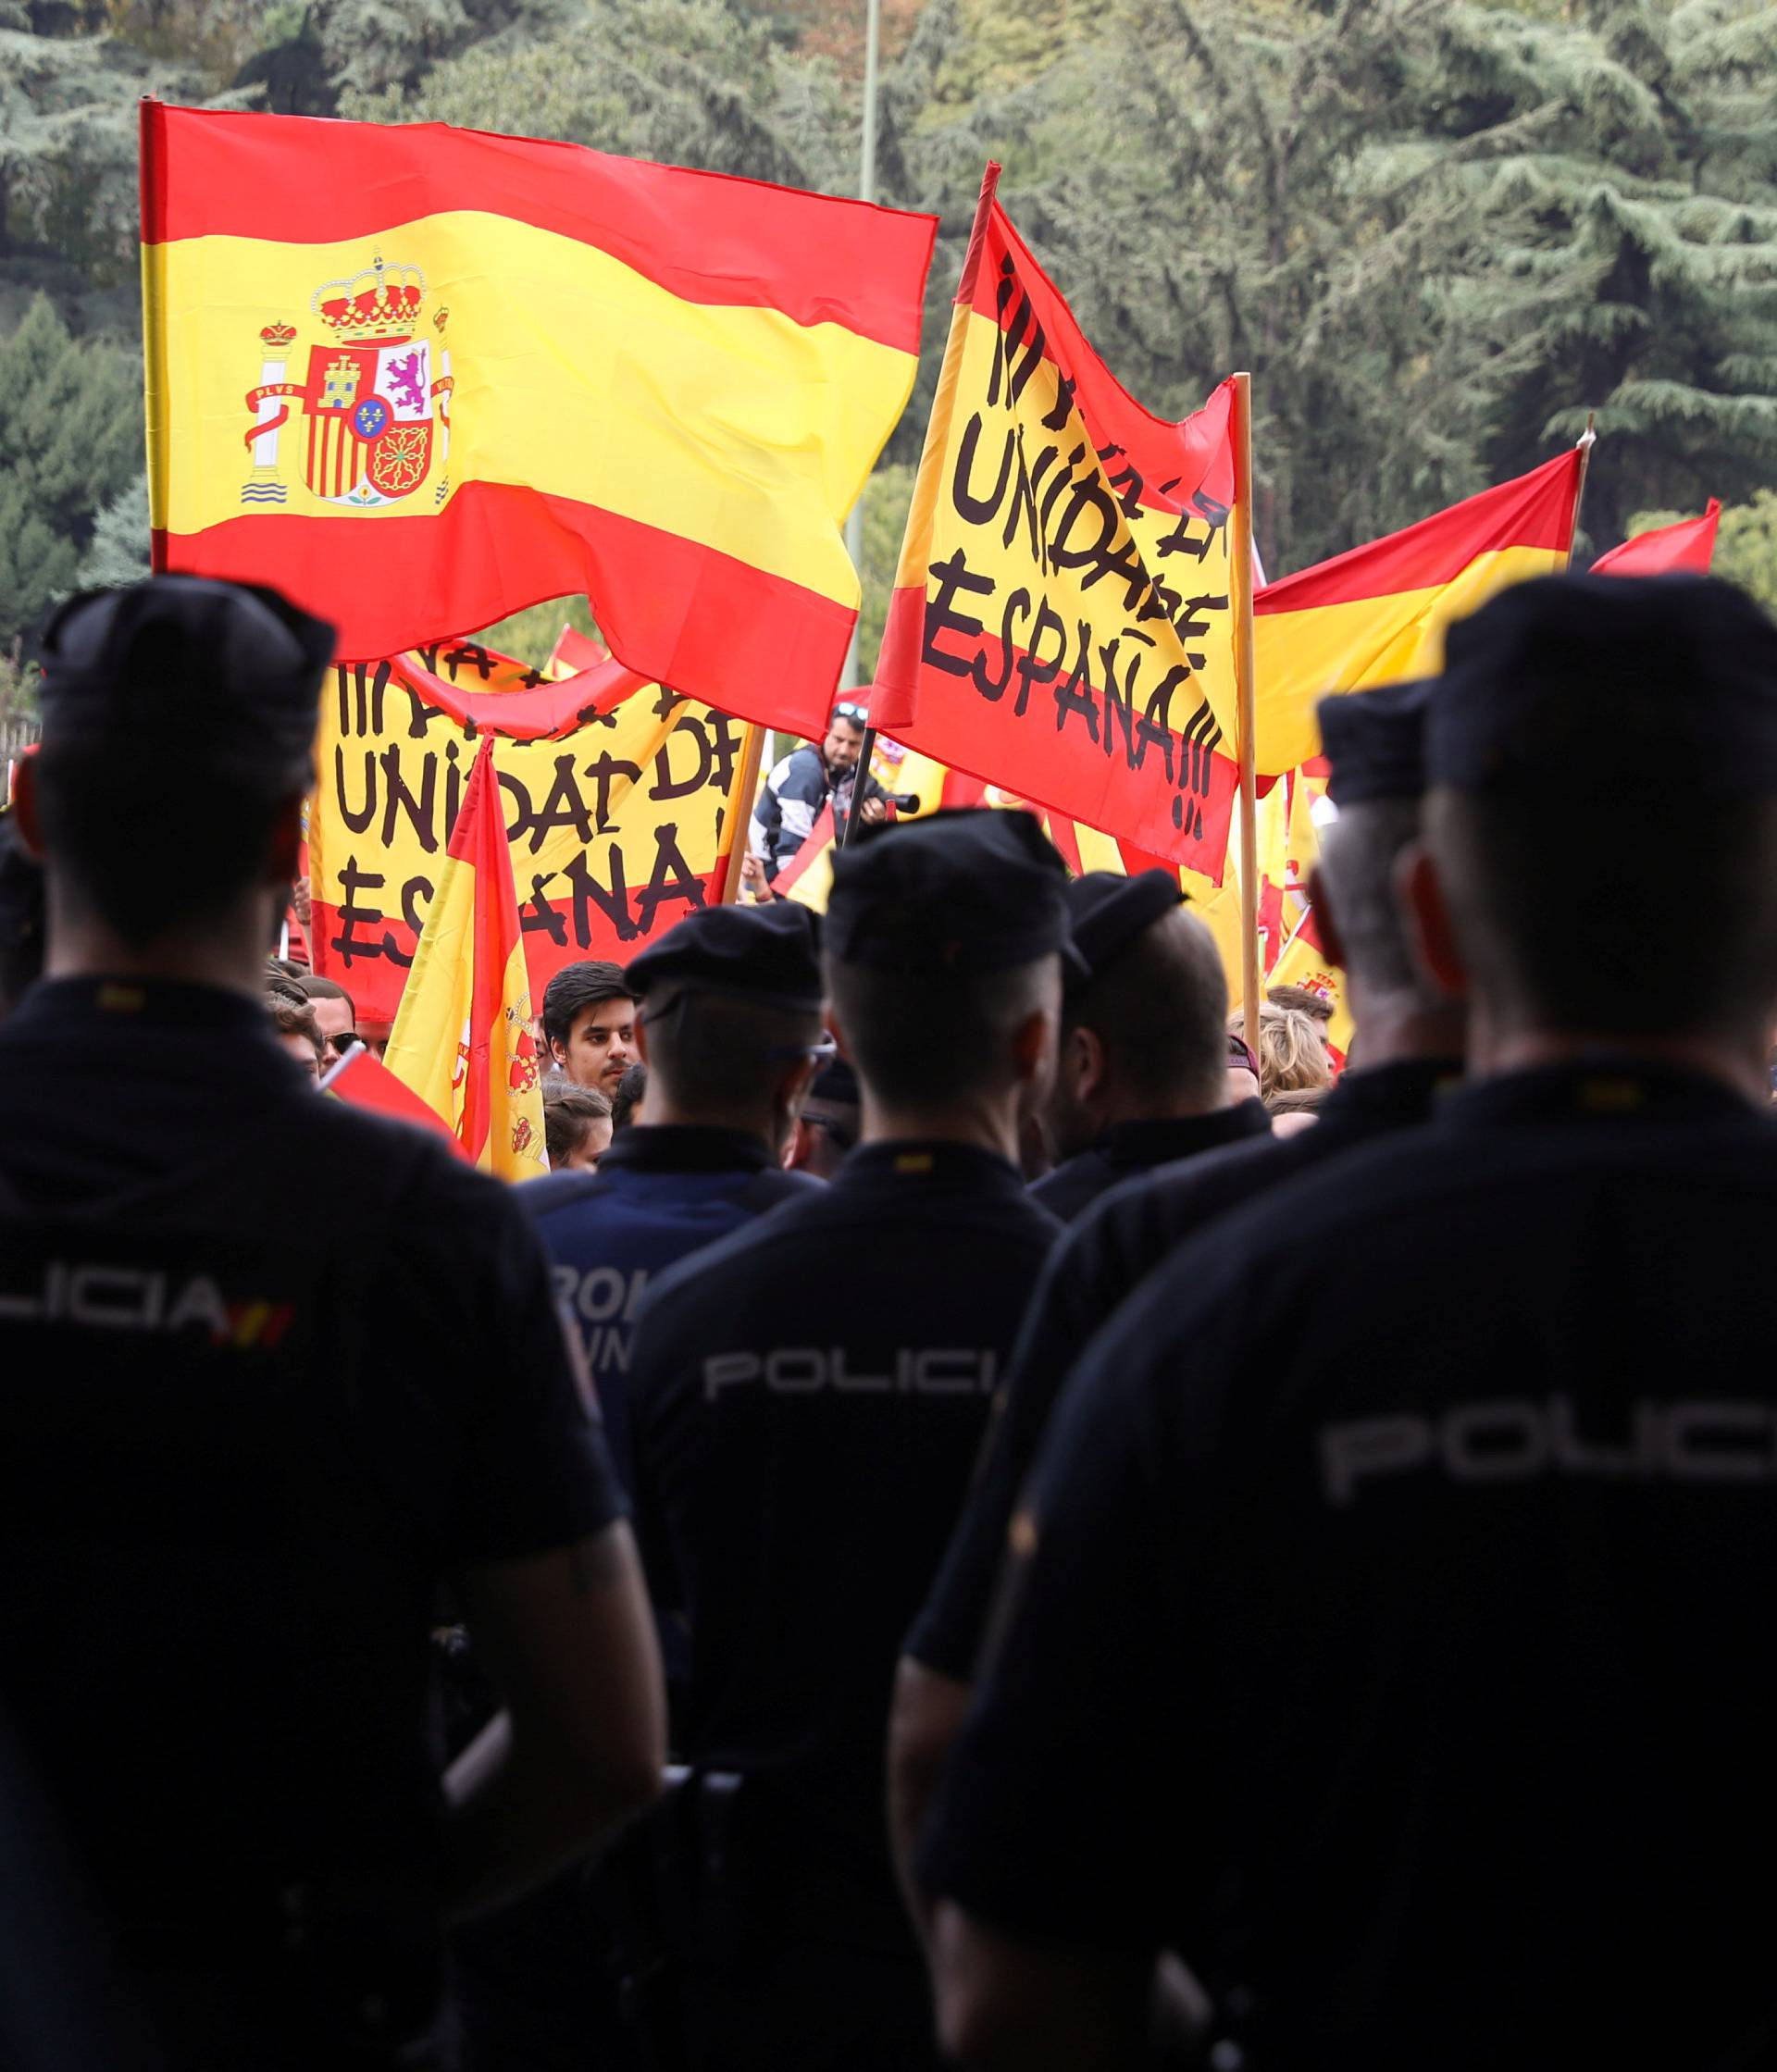 Police stand in front of demonstrators waving Spanish flags in front of city hall during a demonstration in favor of a unified Spain a day before the banned October 1 independence referendum, in Madrid